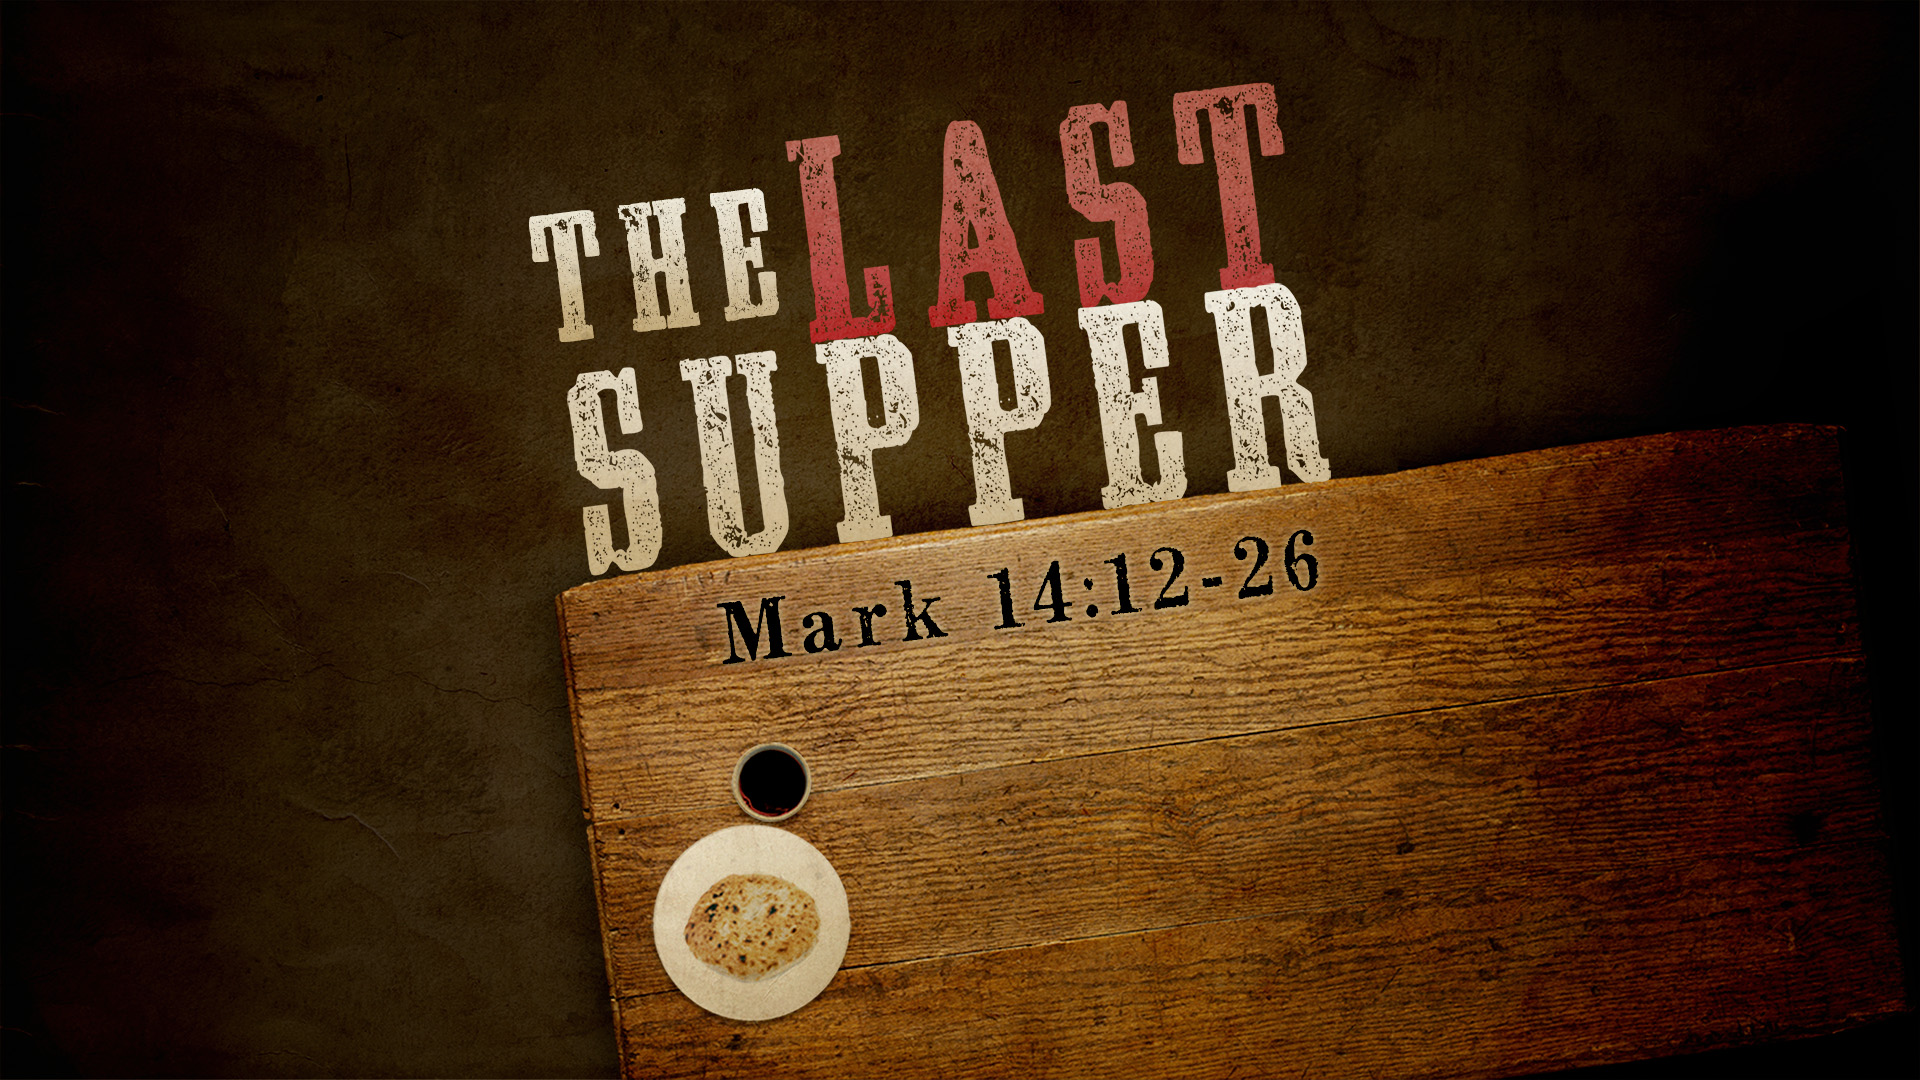 The Last Supper: A Fulfilling Meal Image